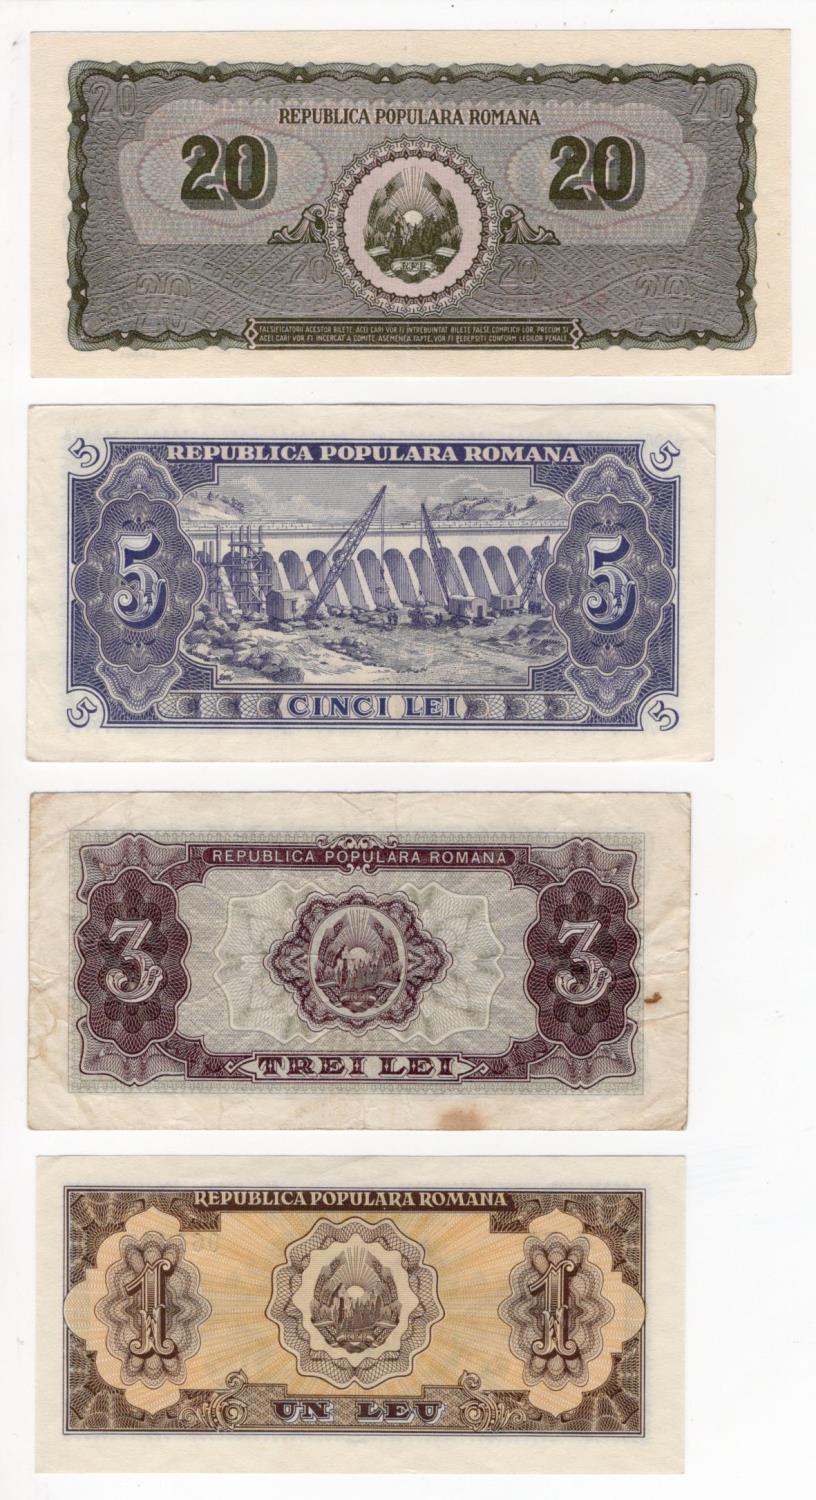 Romania (4), 20 Lei dated 15th June 1950 serial Y/2 0896624, 1 Lei, 3 Lei and 5 Lei dated 1952 ( - Image 2 of 2